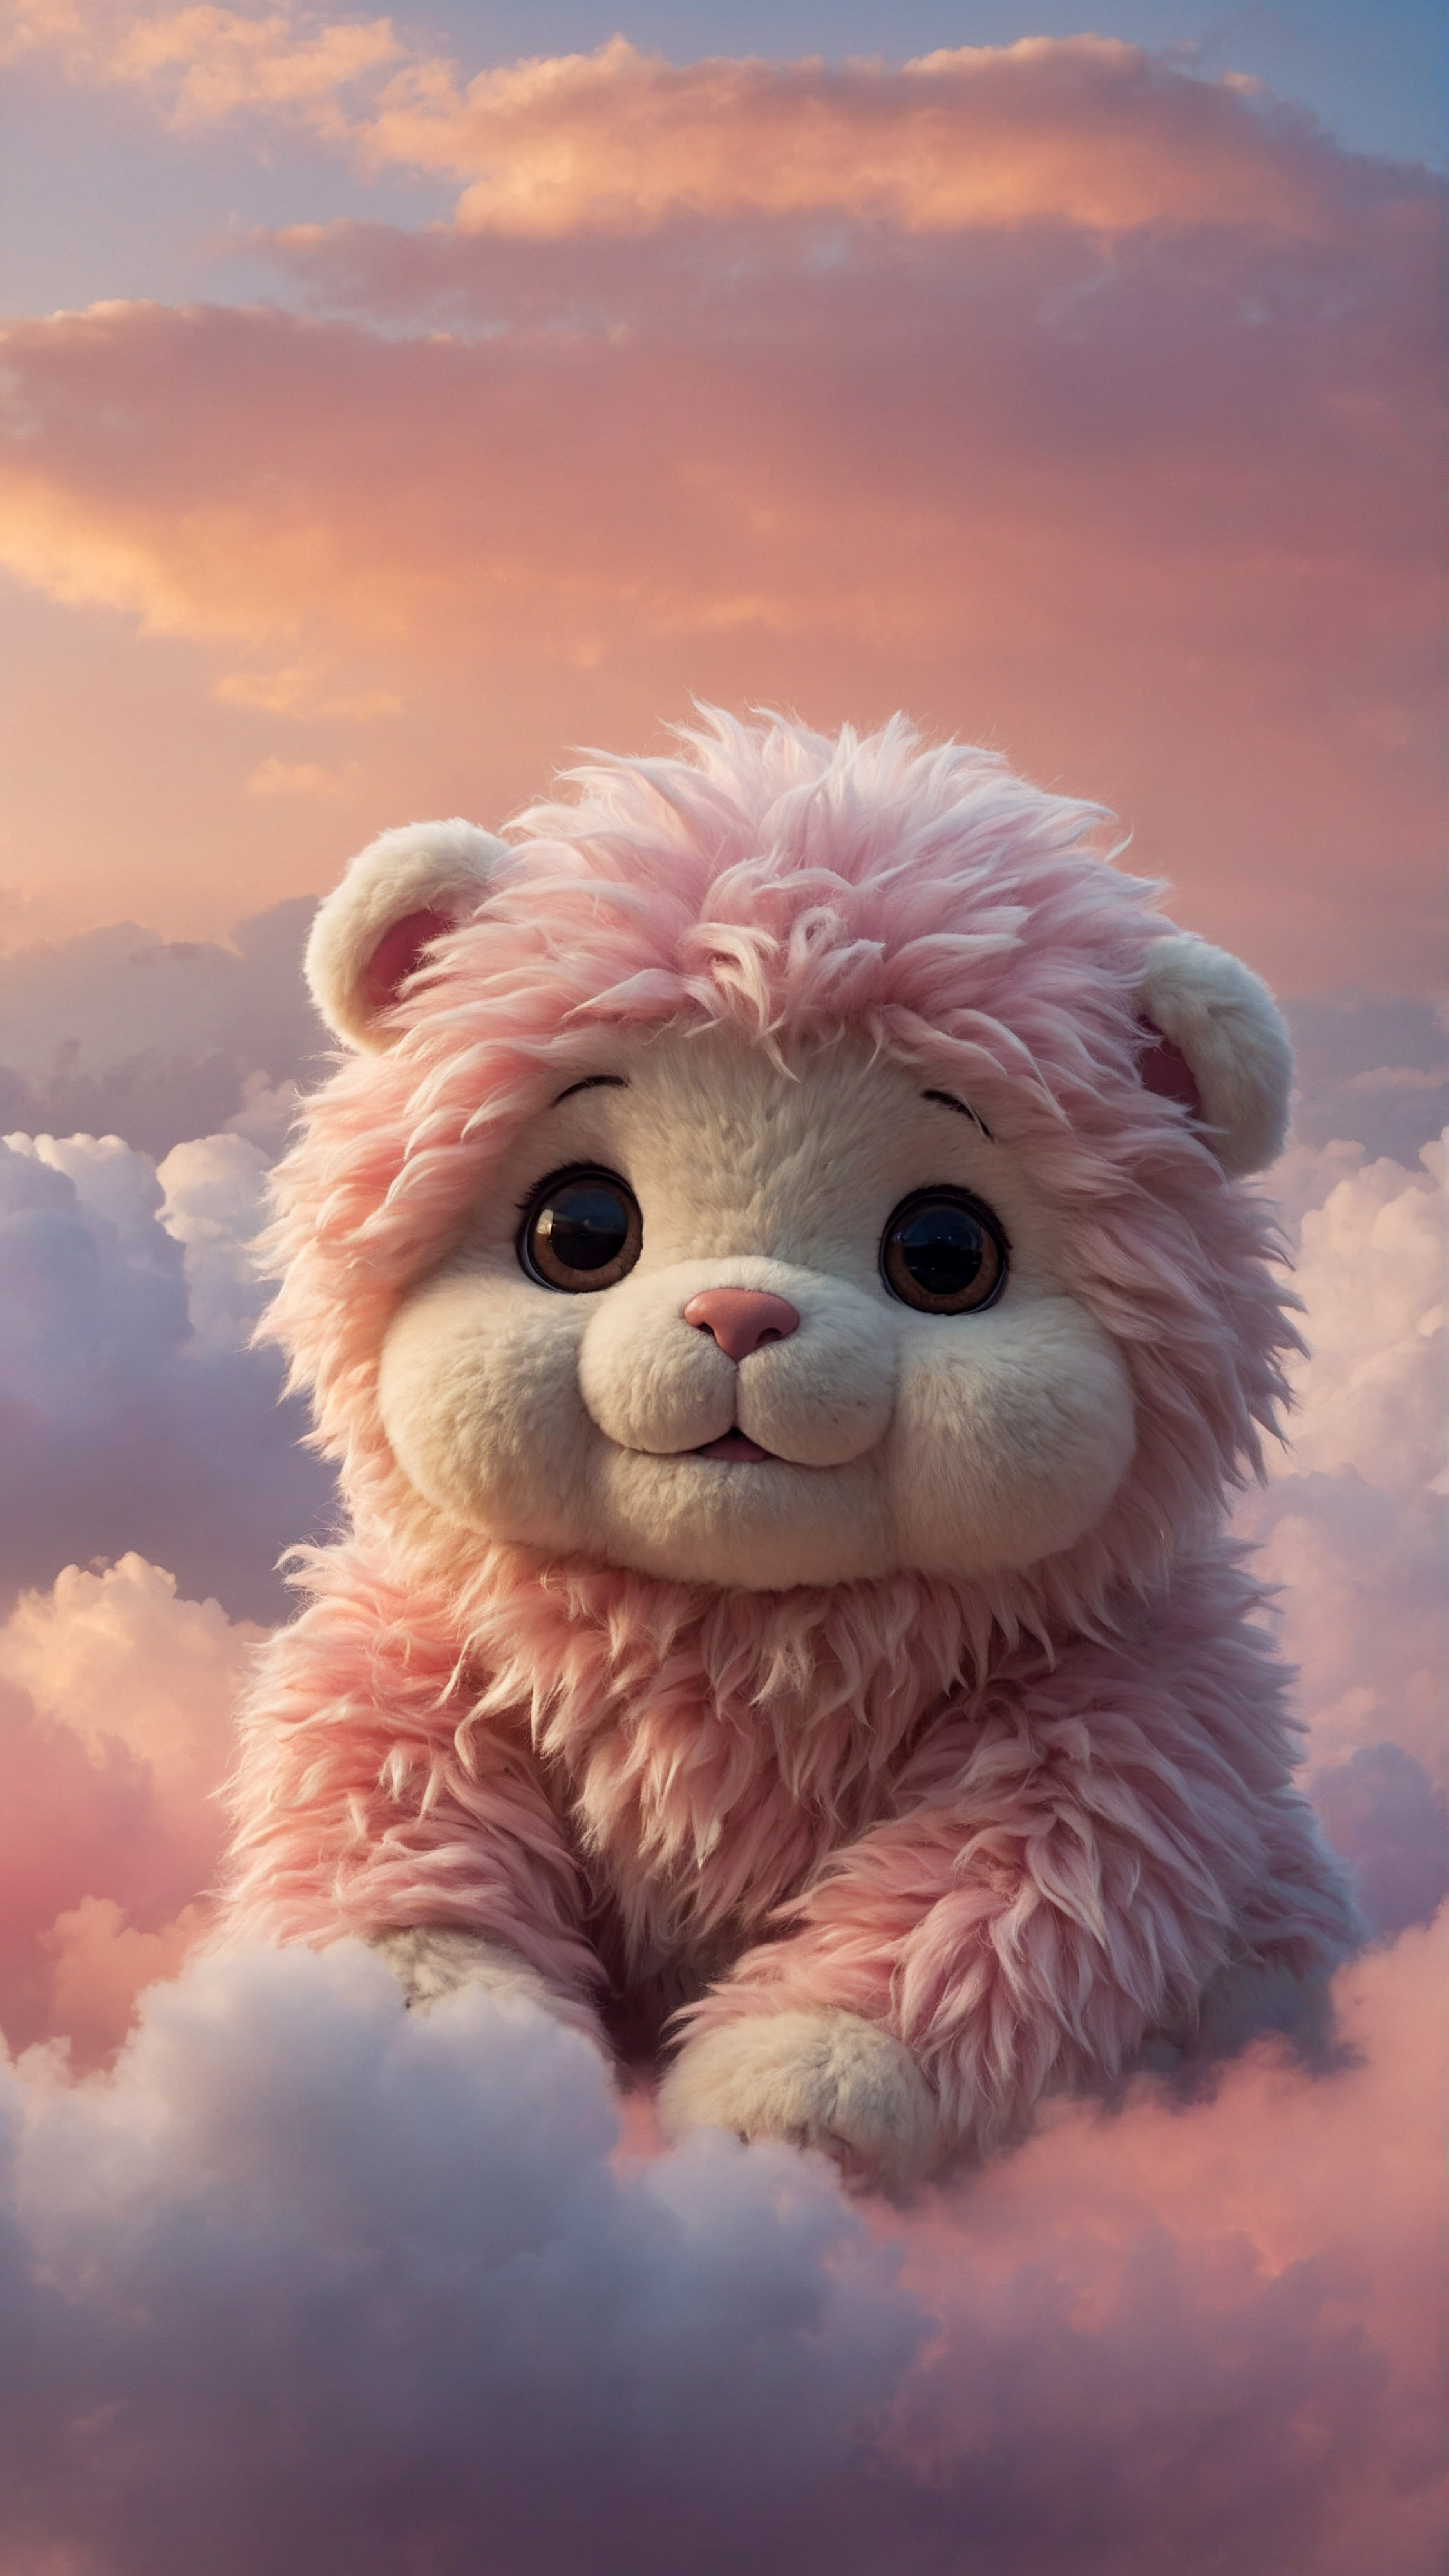 Transform your device’s appearance with our best home screen wallpaper for iPhone, showcasing an adorable plush creature with a smiling face, sitting amidst fluffy clouds under a soft, pastel pink sky during what appears to be sunset.